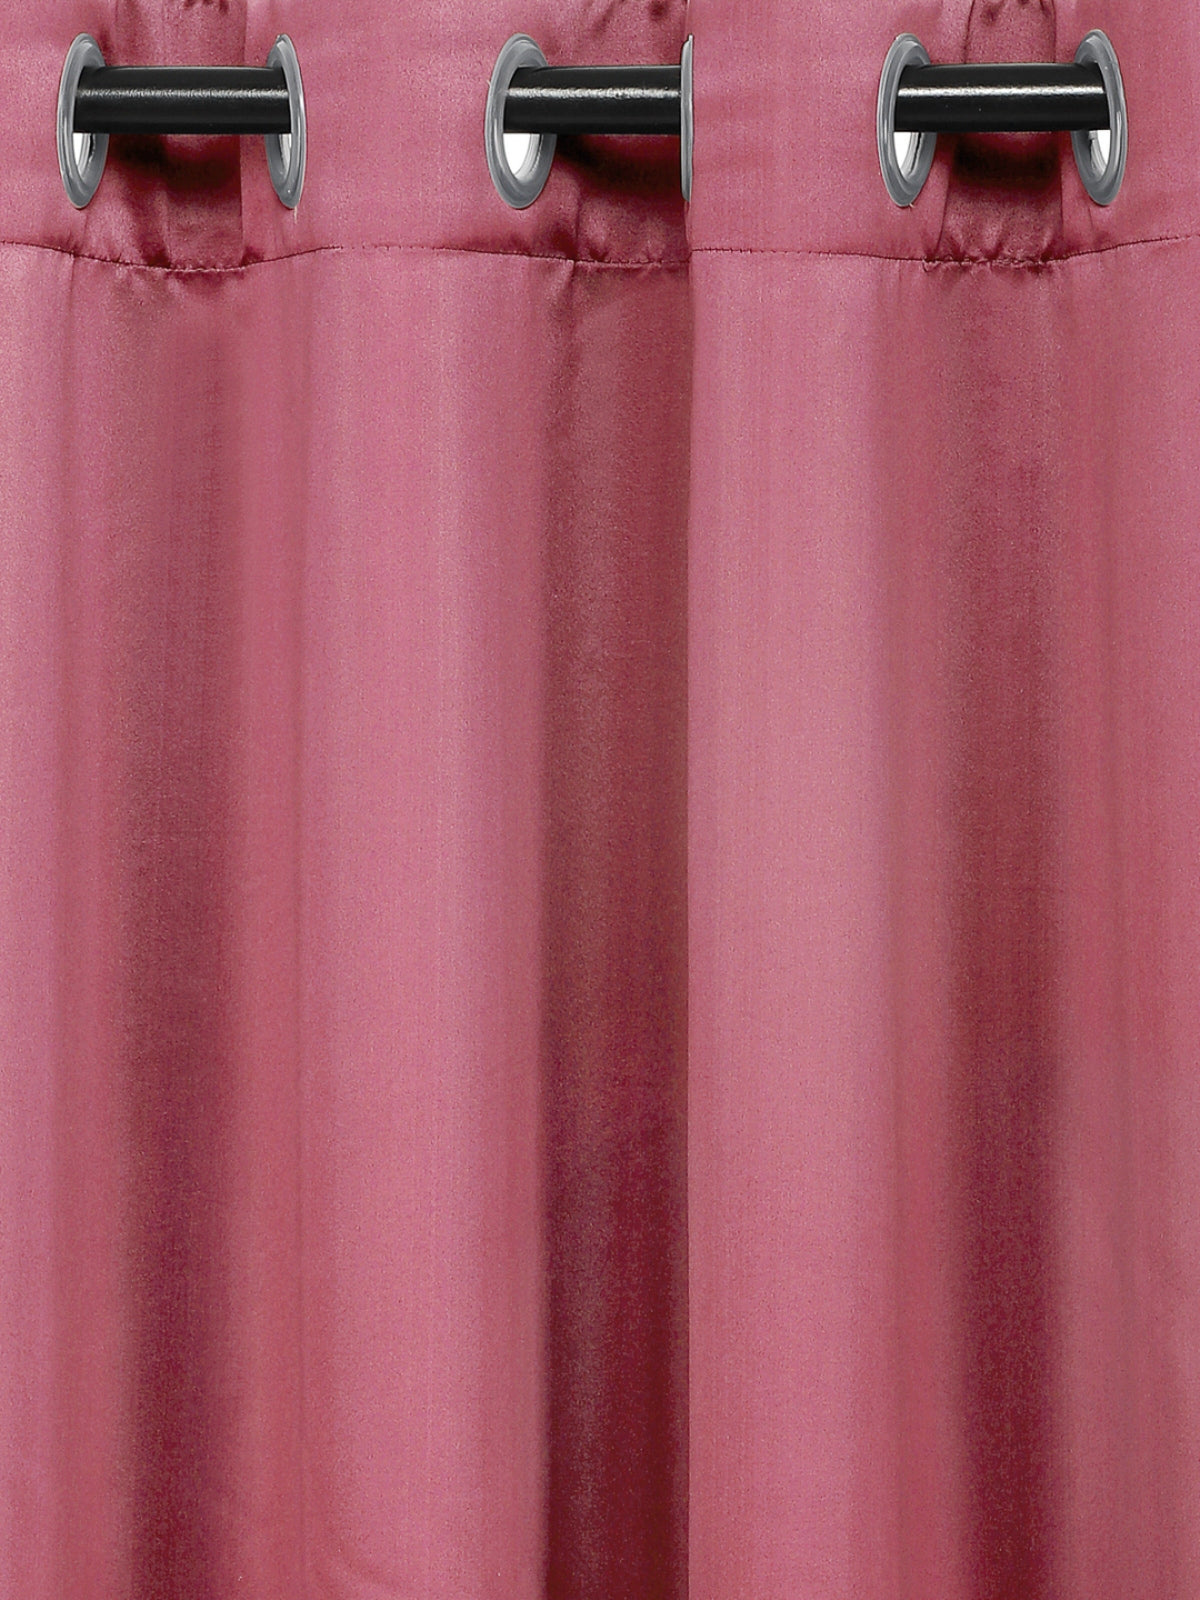 Romee Pink Solid Patterned Set of 2 Door Curtains